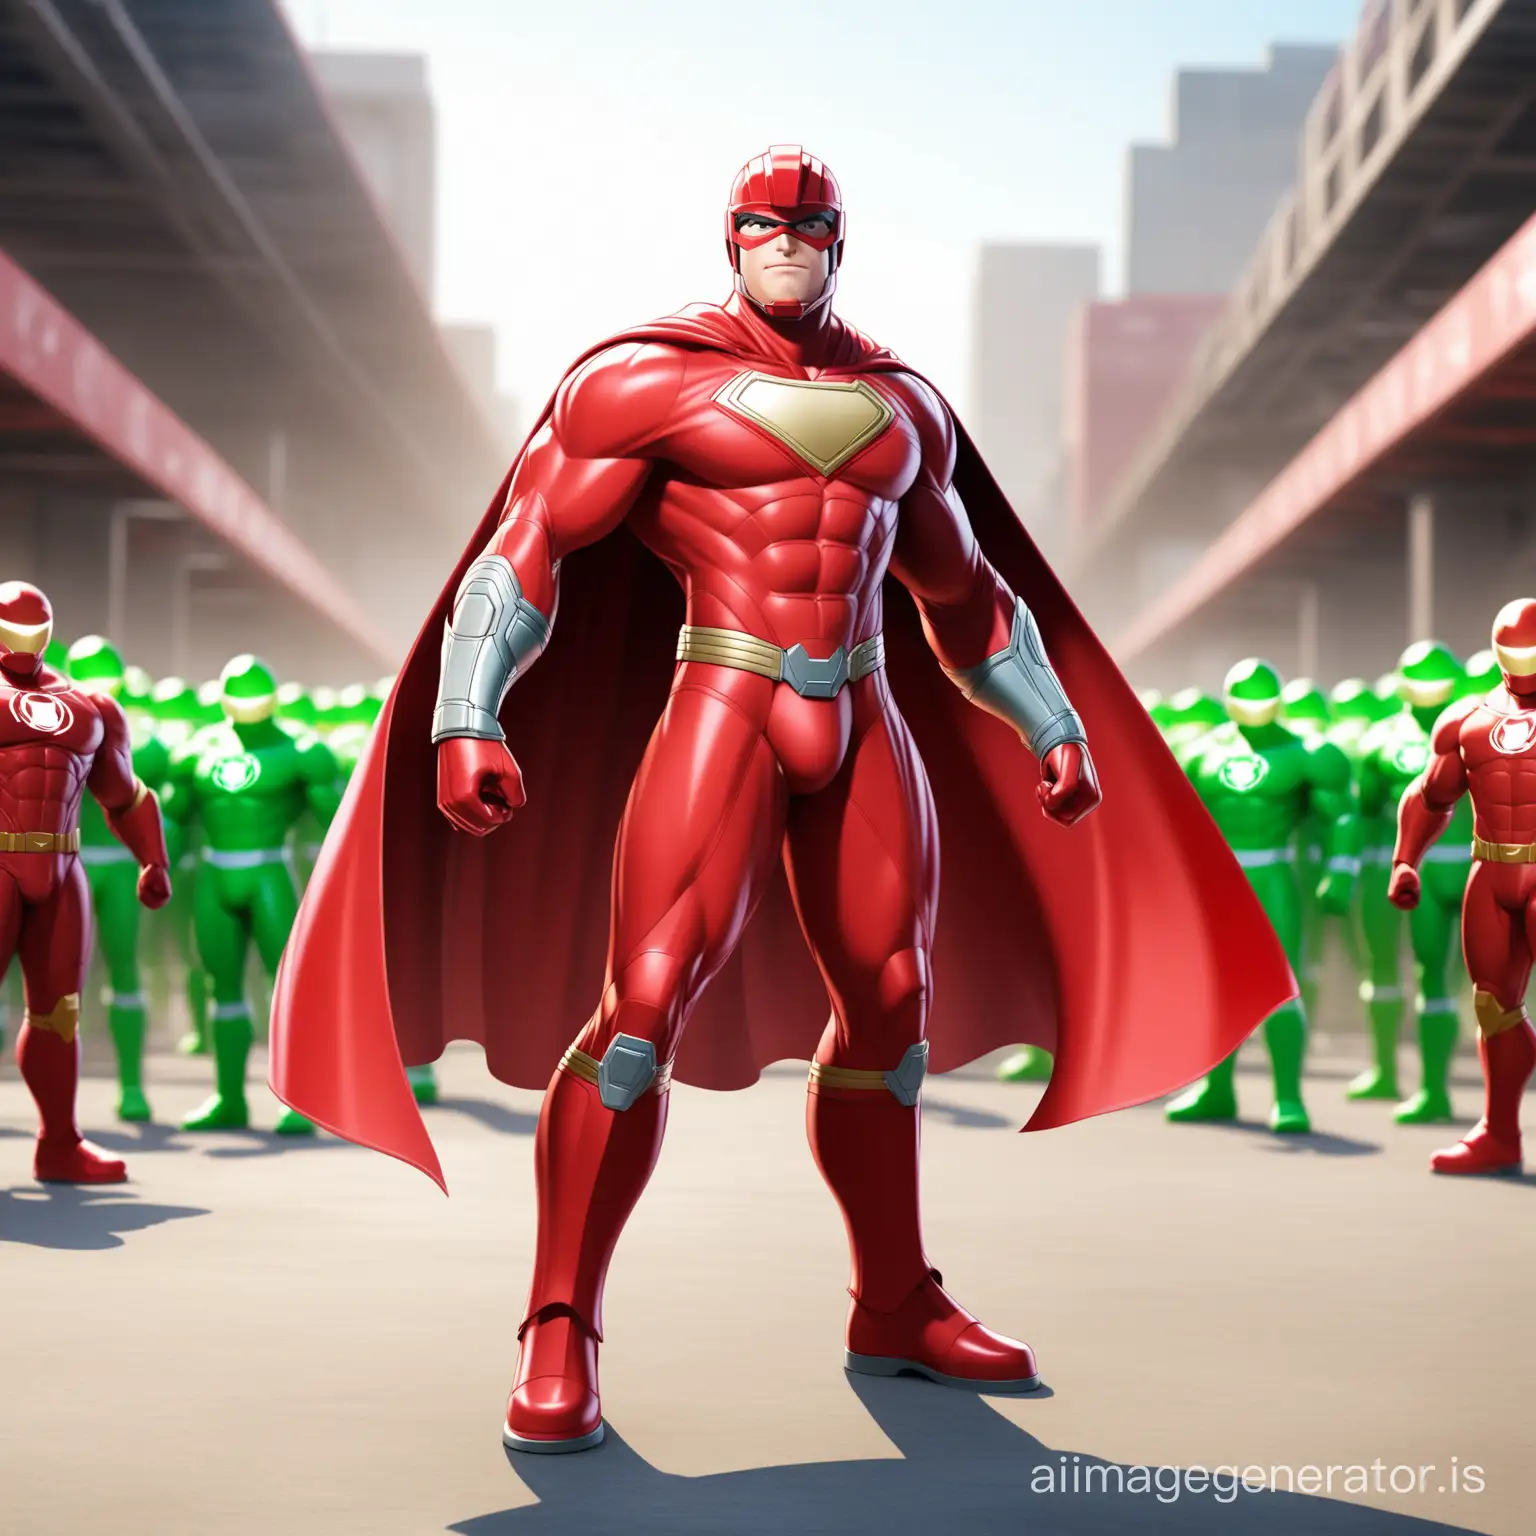 cgi character of super hero recycling warrior. Should be wearing a red cape and red helmet.  Add multiple different characters in the background